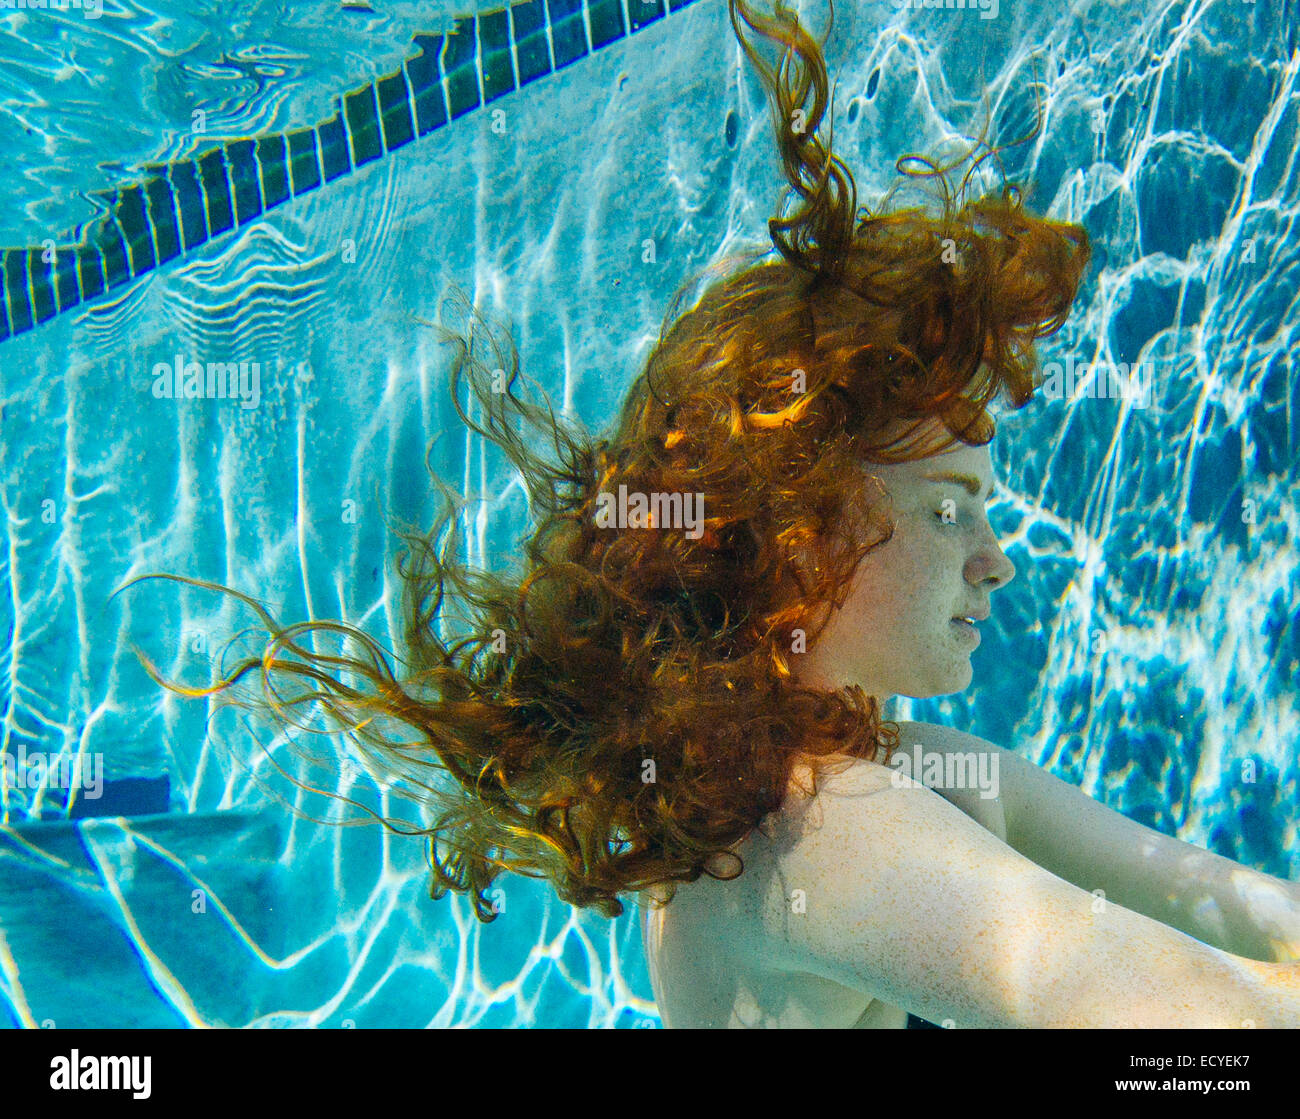 Teenage girl with red hair swimming underwater in pool Stock Photo